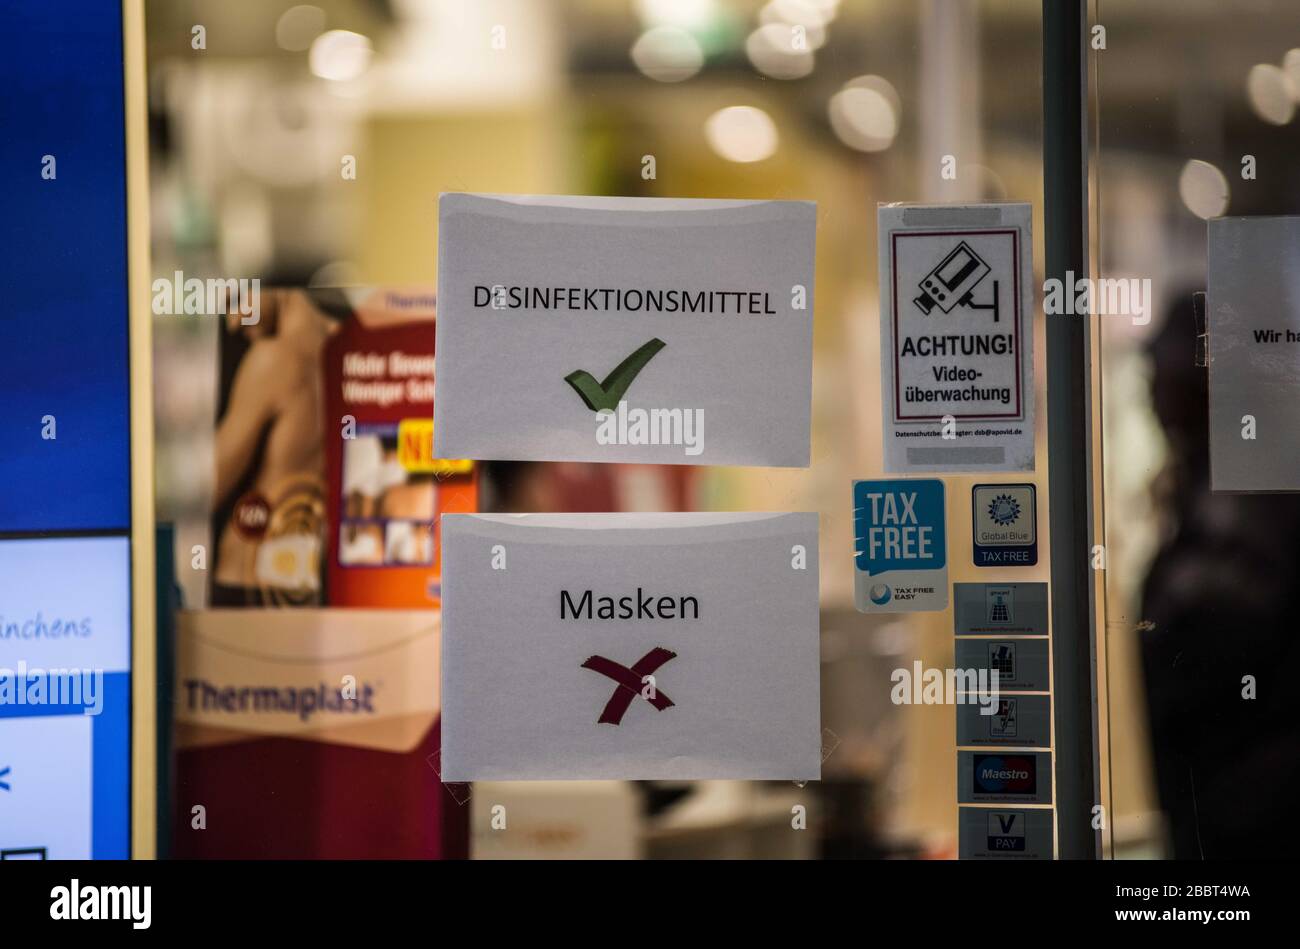 Munich, Bavaria, Germany. 1st Apr, 2020. A pharmacy in Munich's Stachus Passage indicates it has hand disinfection gel, but no breaking masks. Despite being cautiously optimistic regarding the efforts to flatten the curve, Parts of Germany, such as Bavaria, have announced extensions to the daily life restrictions at least until April and with certain portions extending beyond. Credit: Sachelle Babbar/ZUMA Wire/Alamy Live News Stock Photo